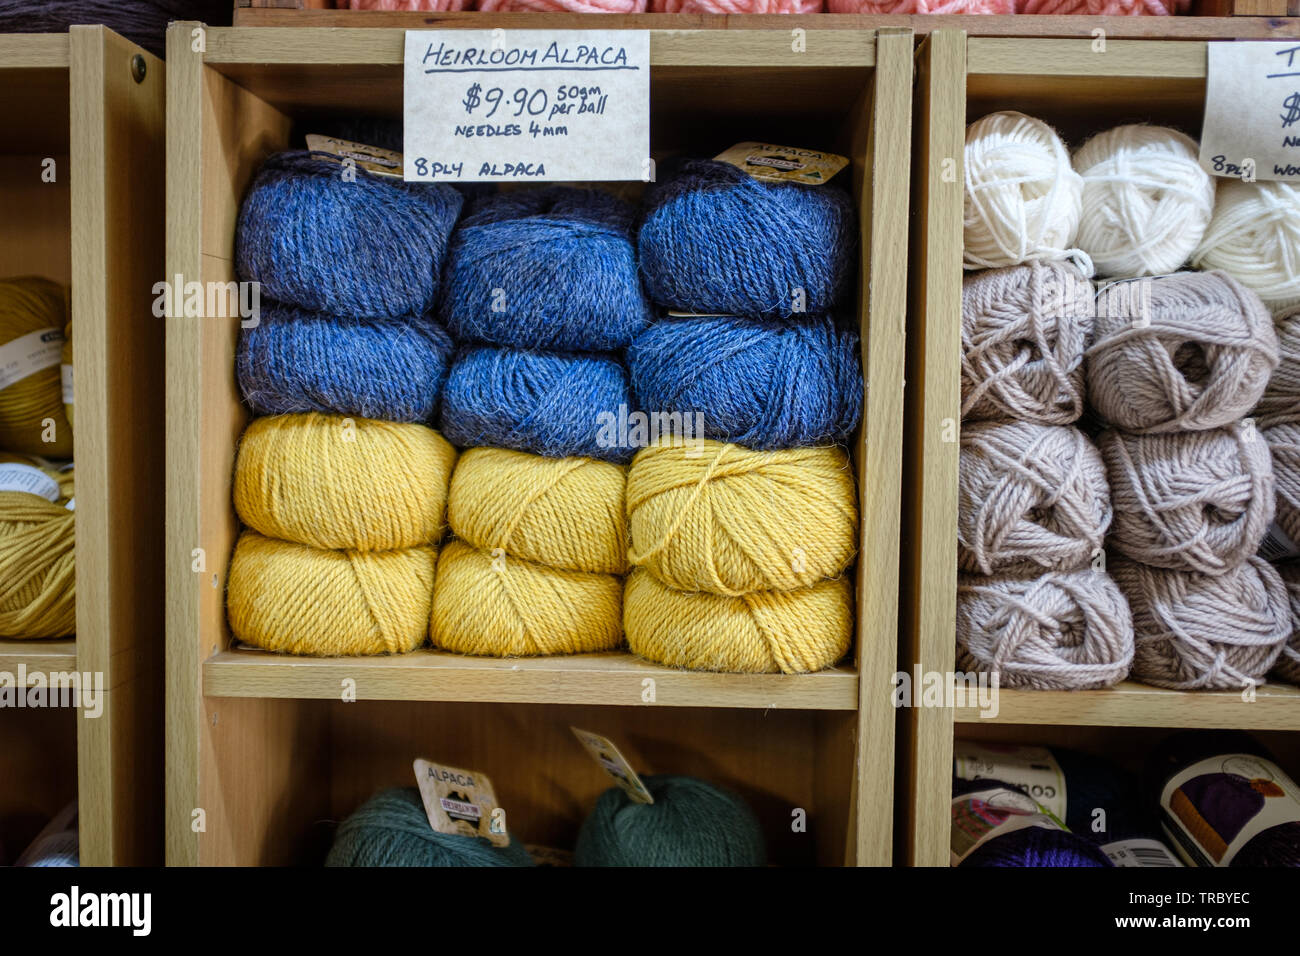 Colourful balls of Heirloom Alpaca wool piled up on shelf in craft shop Stock Photo